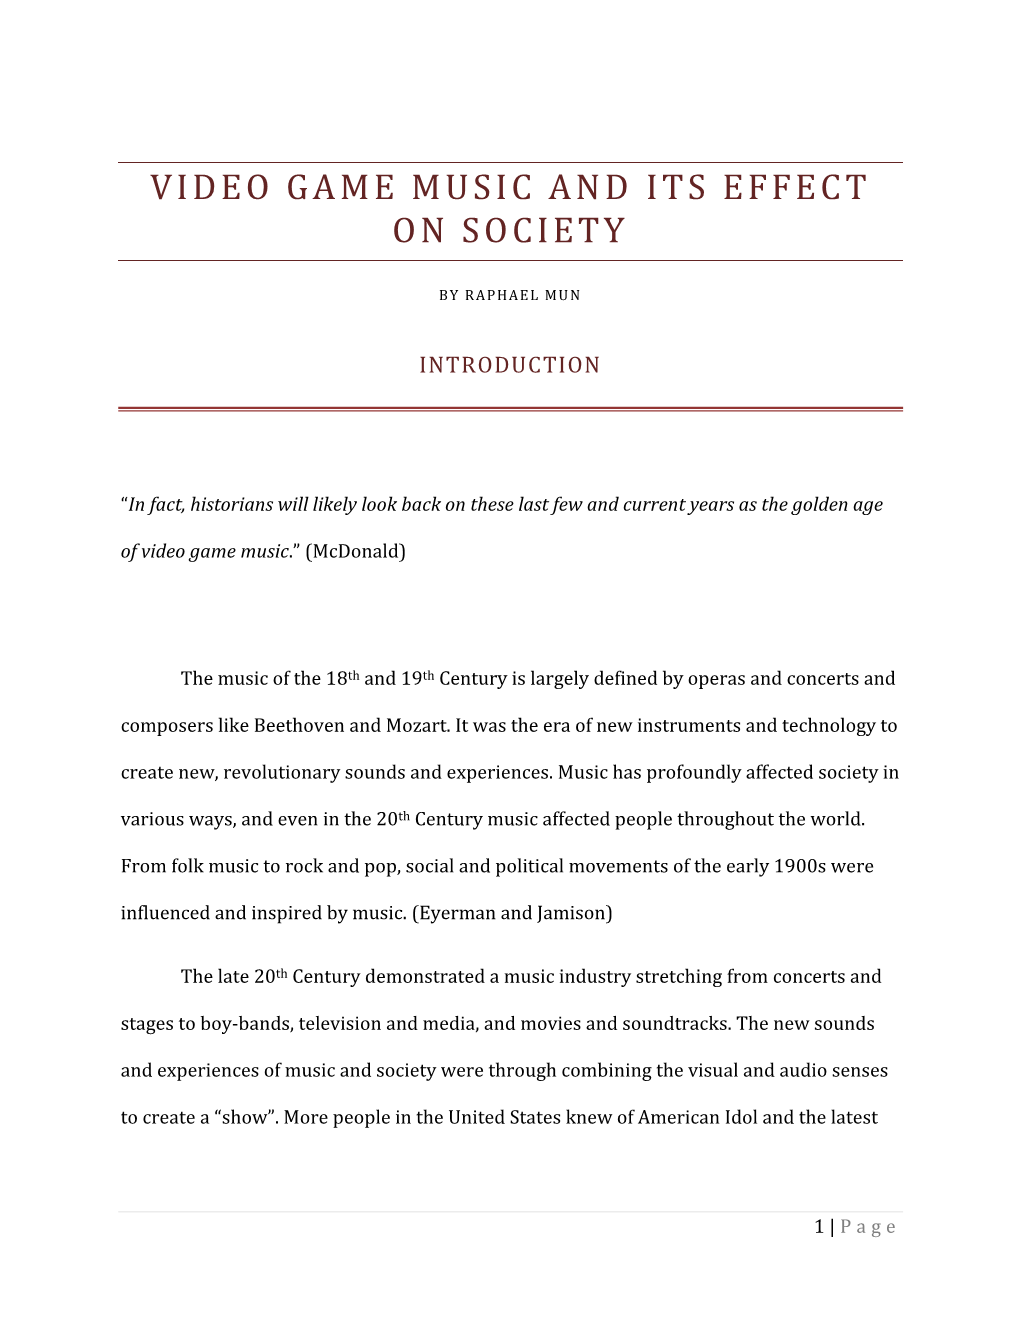 Video Game Music and Its Effect on Society